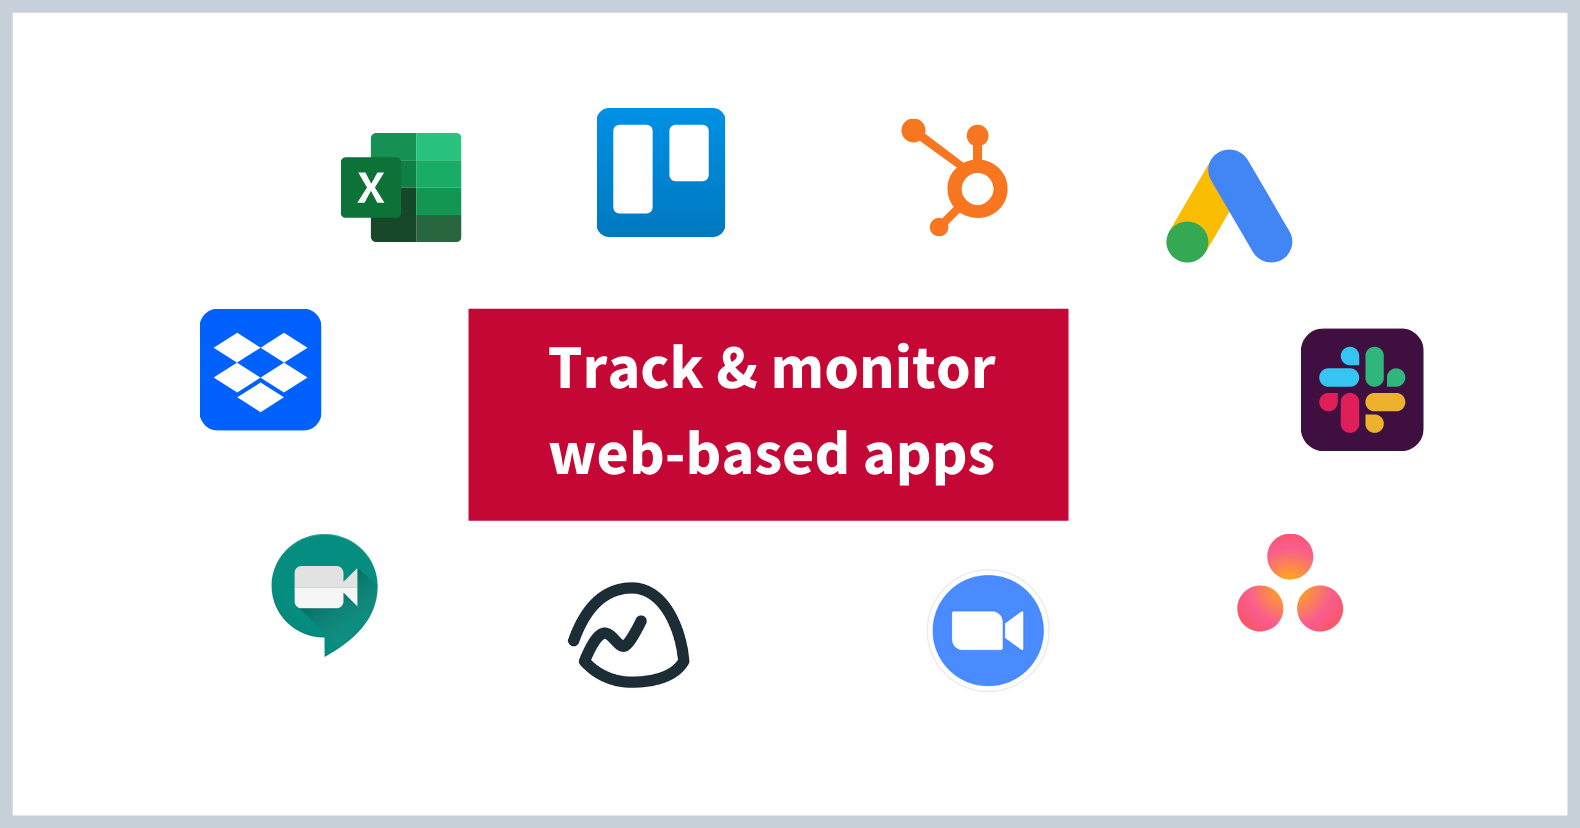 Track & monitor web-based apps with Applixure